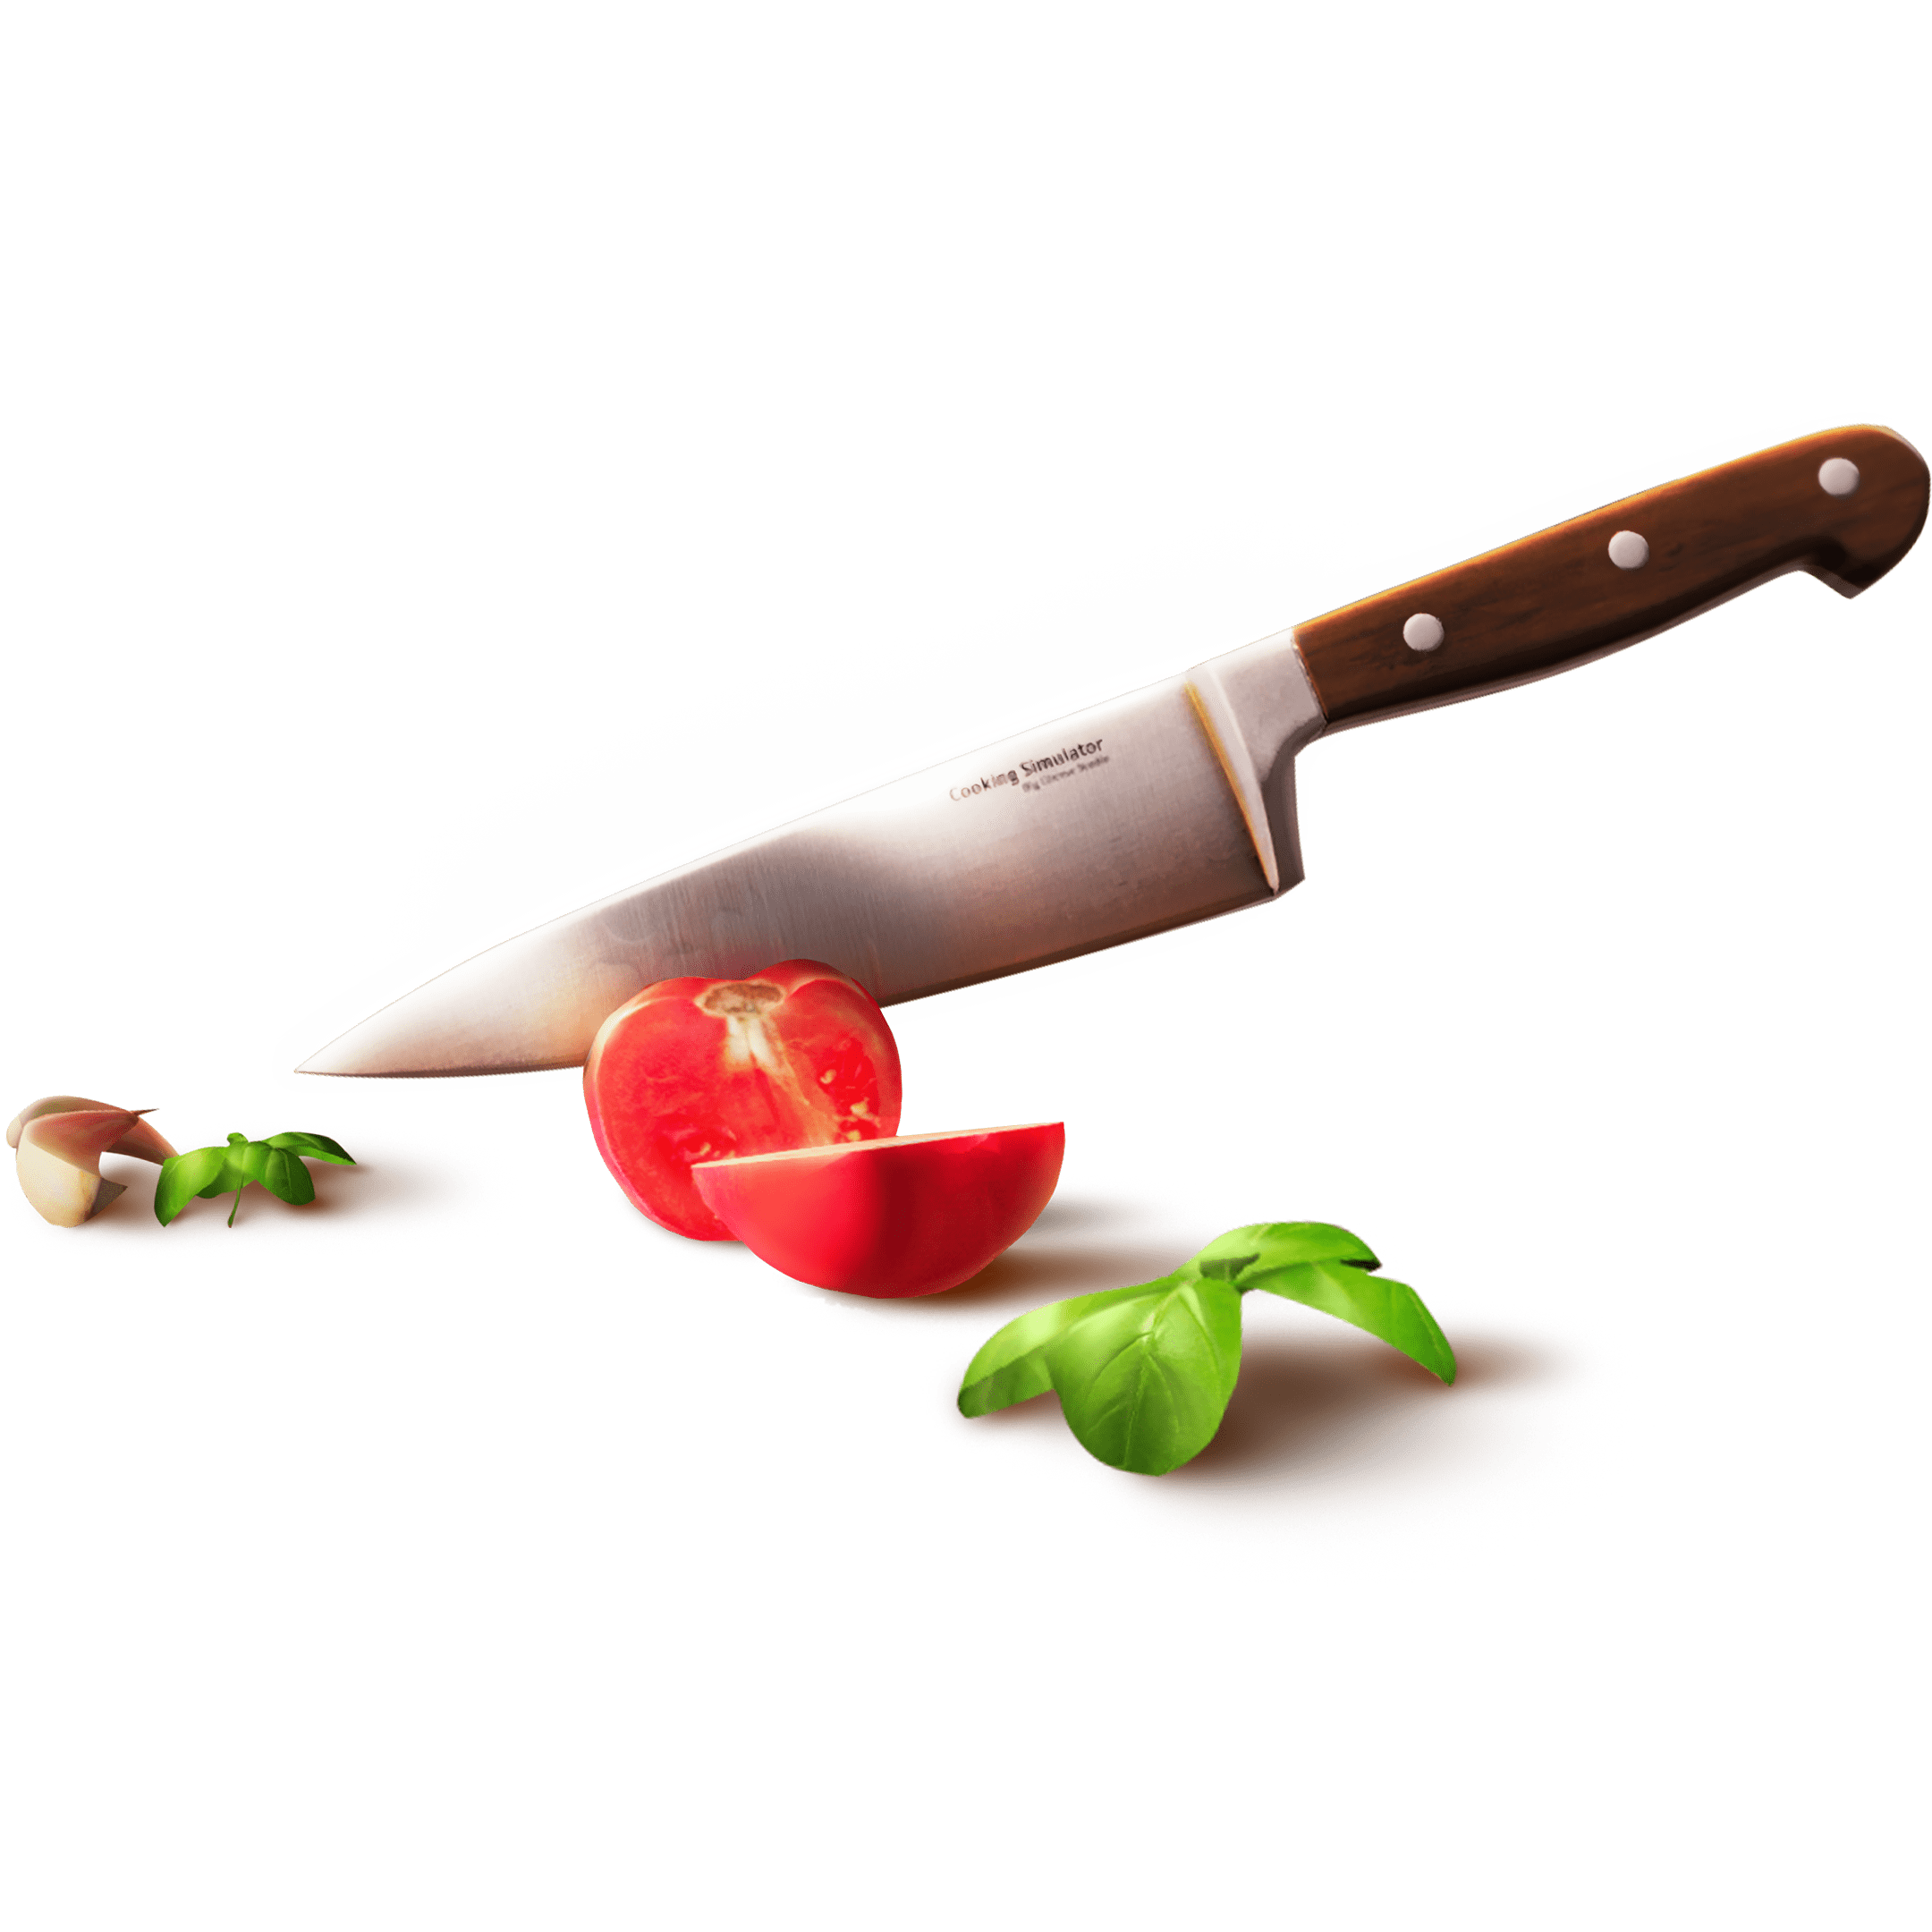 Download Cooking Simulator Now – Free Mediafire Link